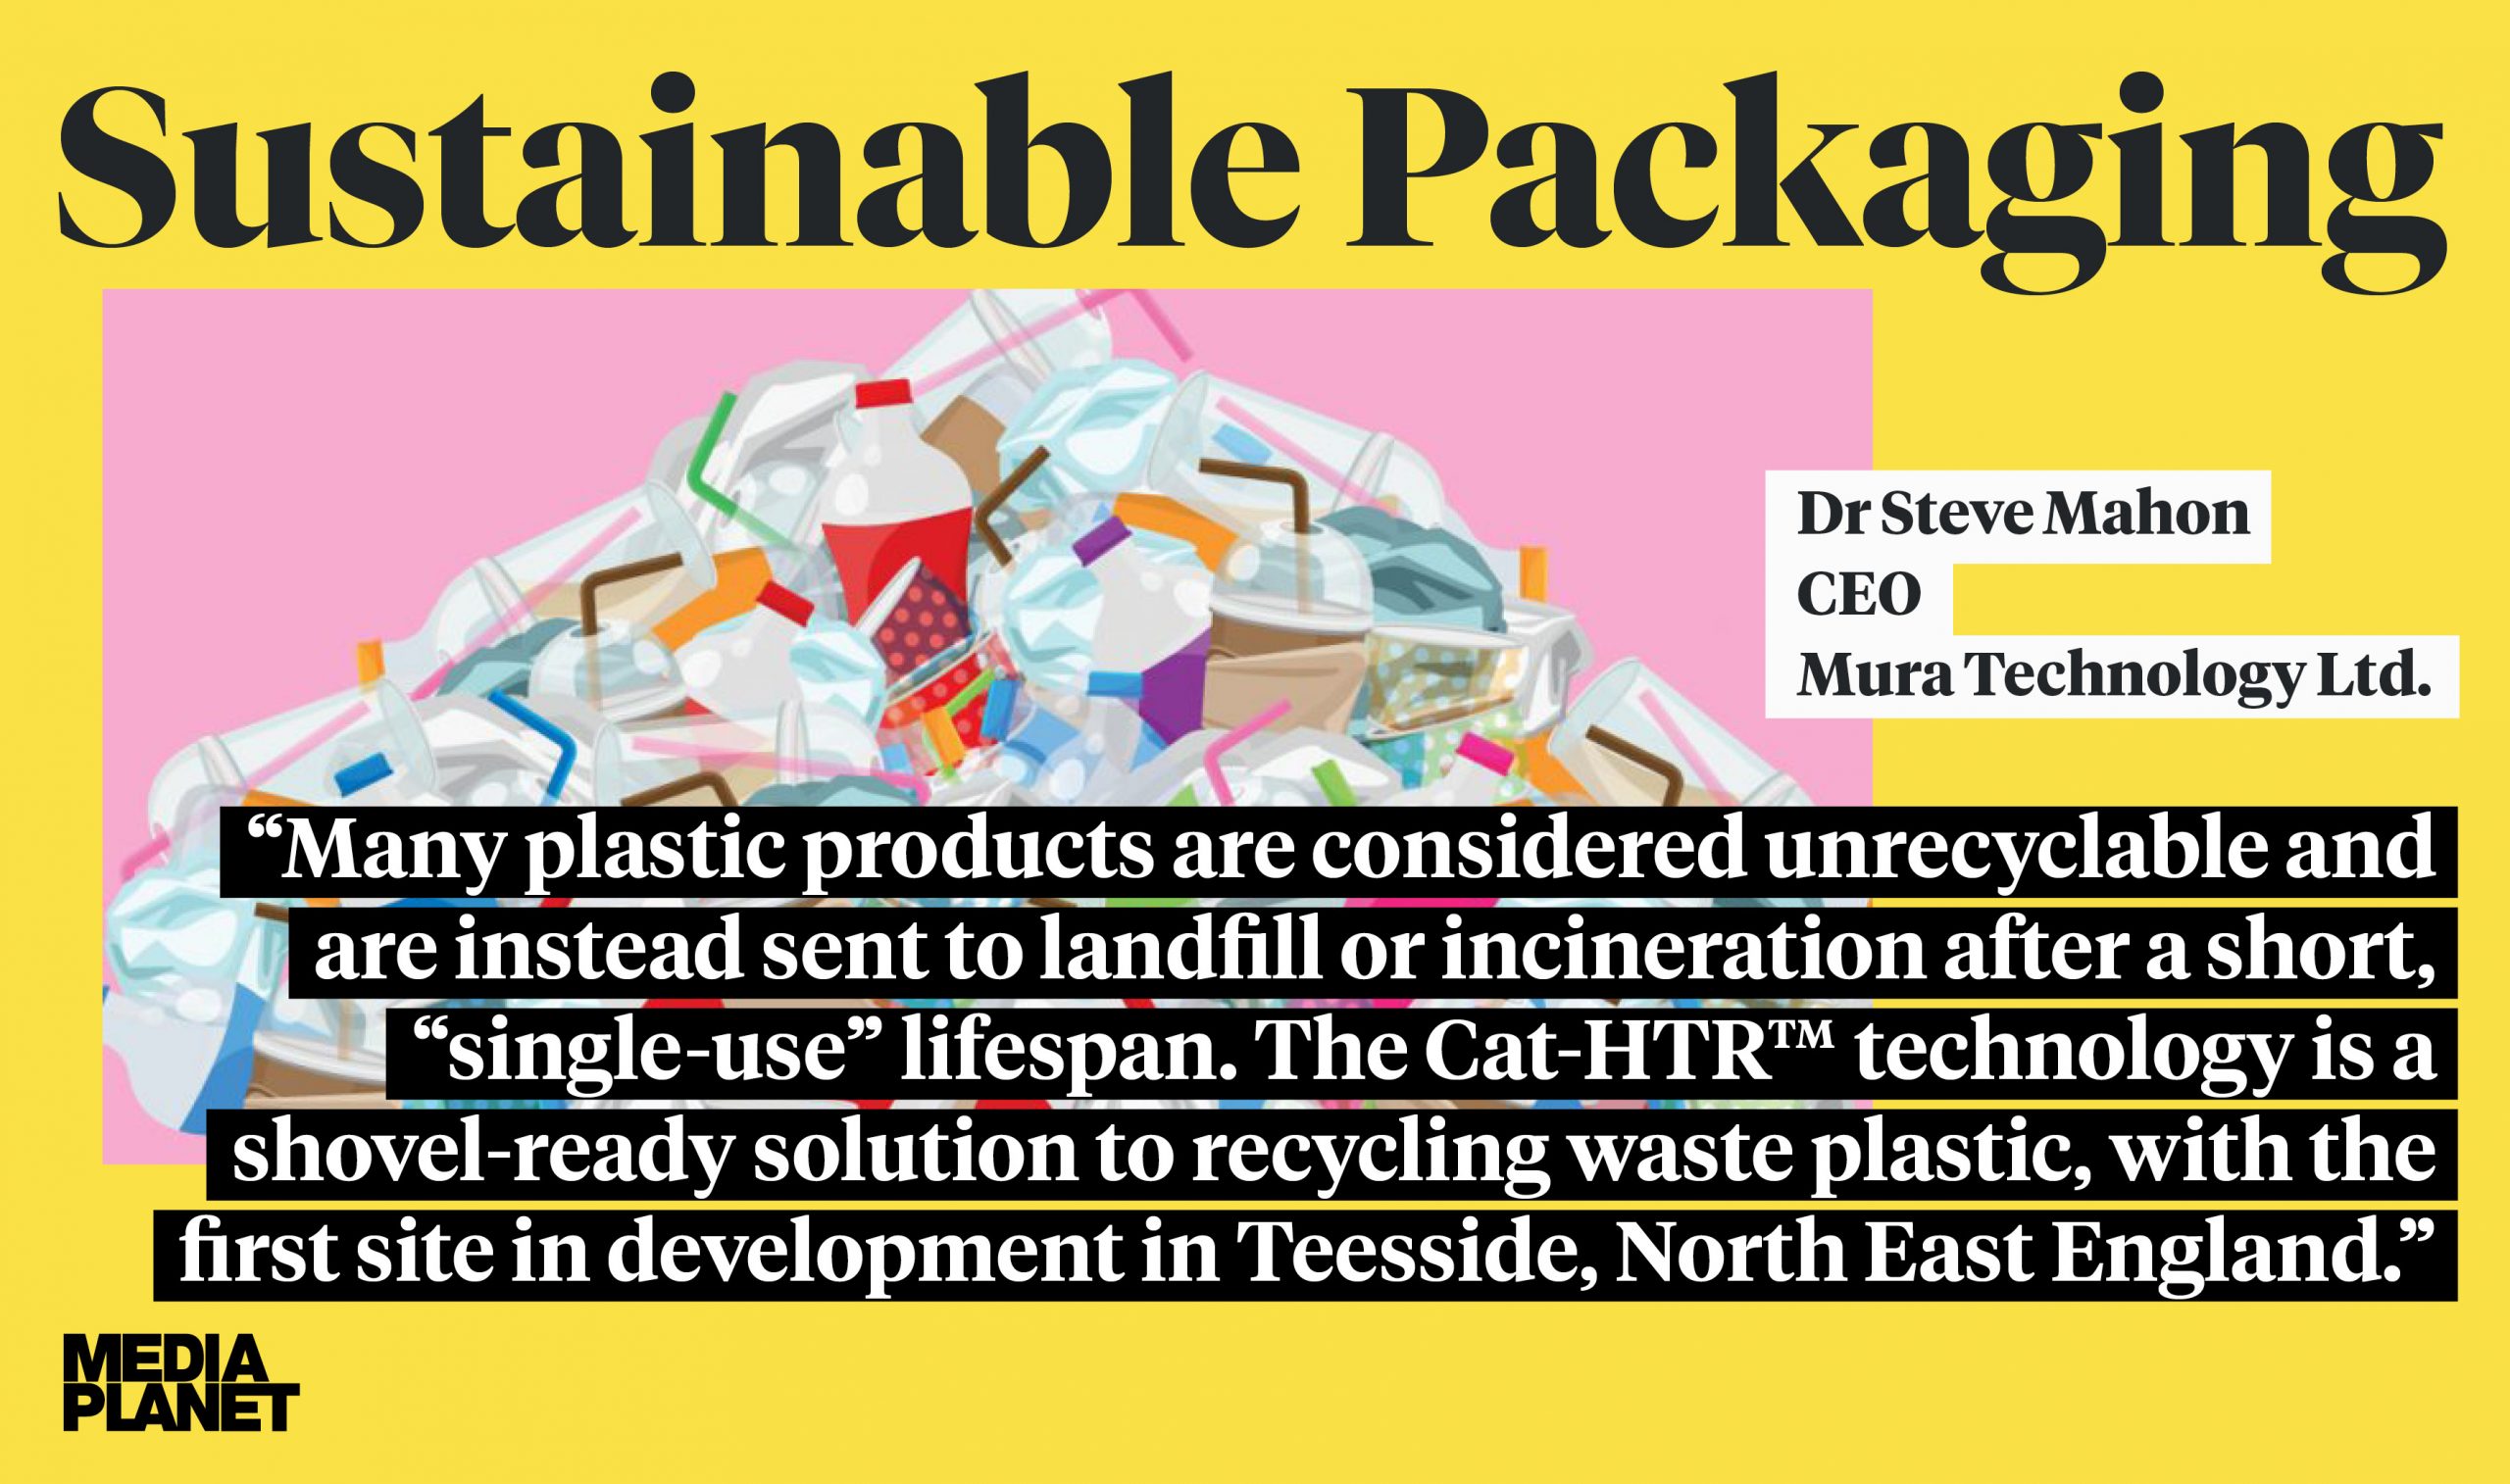 ARMSTRONG’S JOINT VENTURE, MURA TECHNOLOGY LIMITED, IS FEATURED IN THE GUARDIAN’S SUSTAINABLE PACKAGING 2020